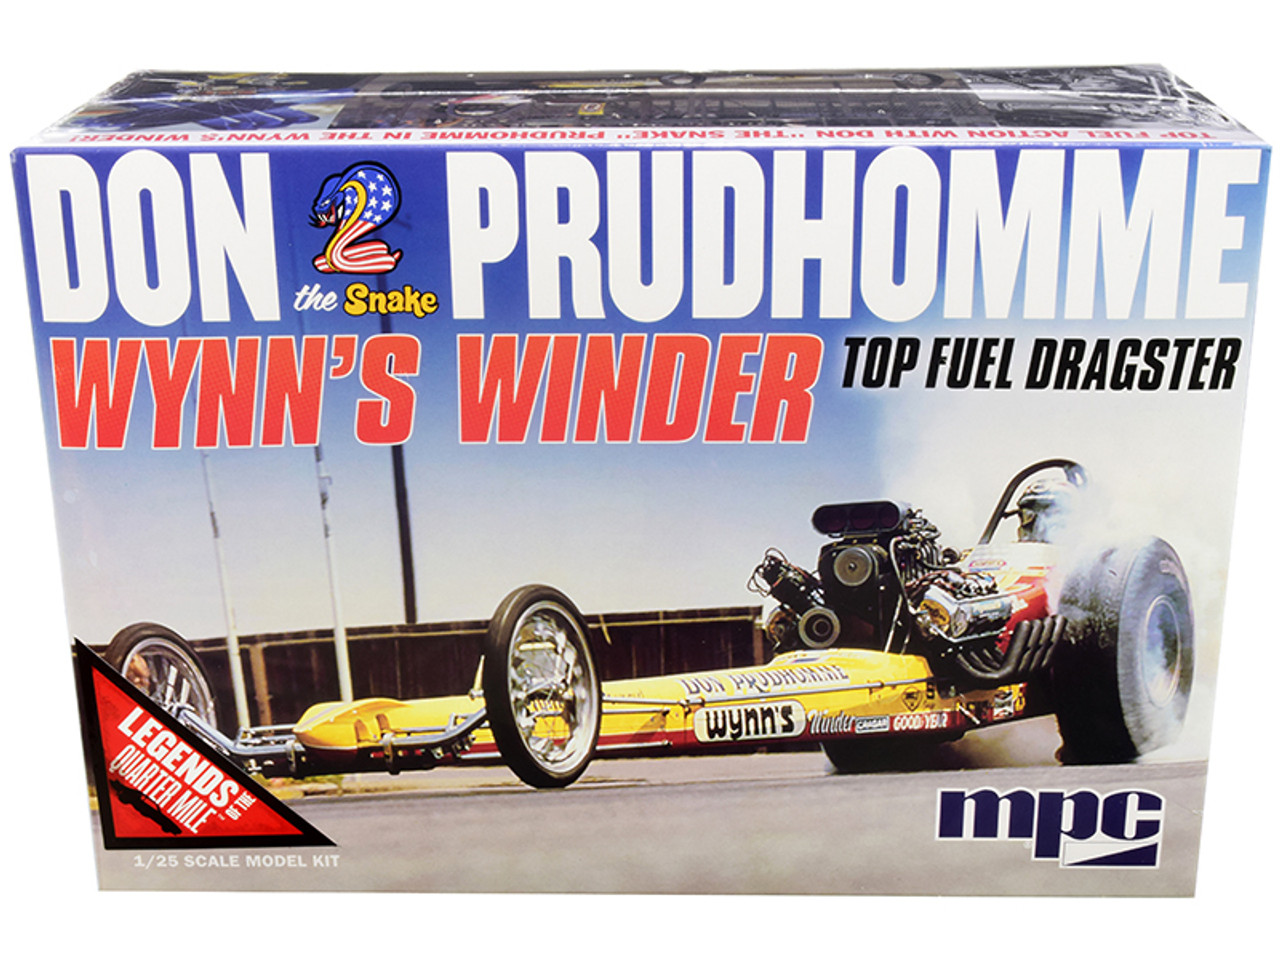 Skill 2 Model Kit Don "Snake" Prudhomme Wynn's Winder TFD Top Fuel Dragster "Legends of the Quarter Mile" 1/25 Scale Model by MPC